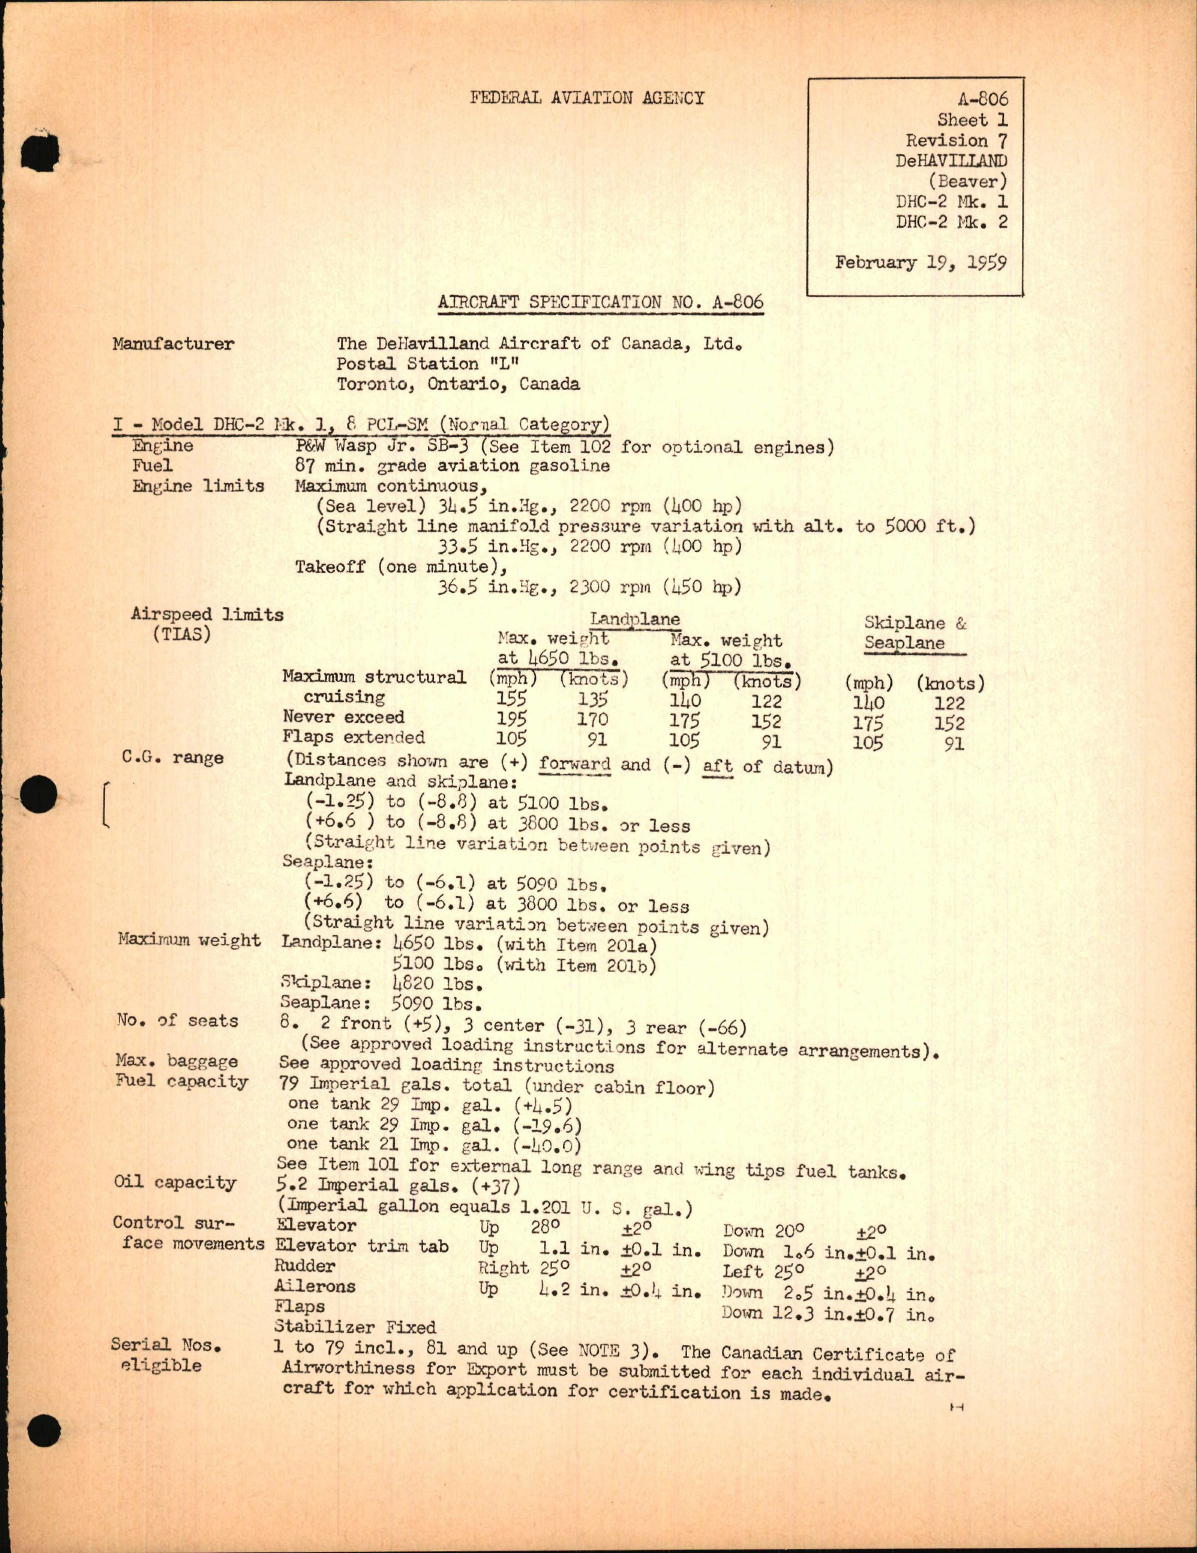 Sample page 1 from AirCorps Library document: DHC-2 Mk.1 and DHC-2 Mk.2